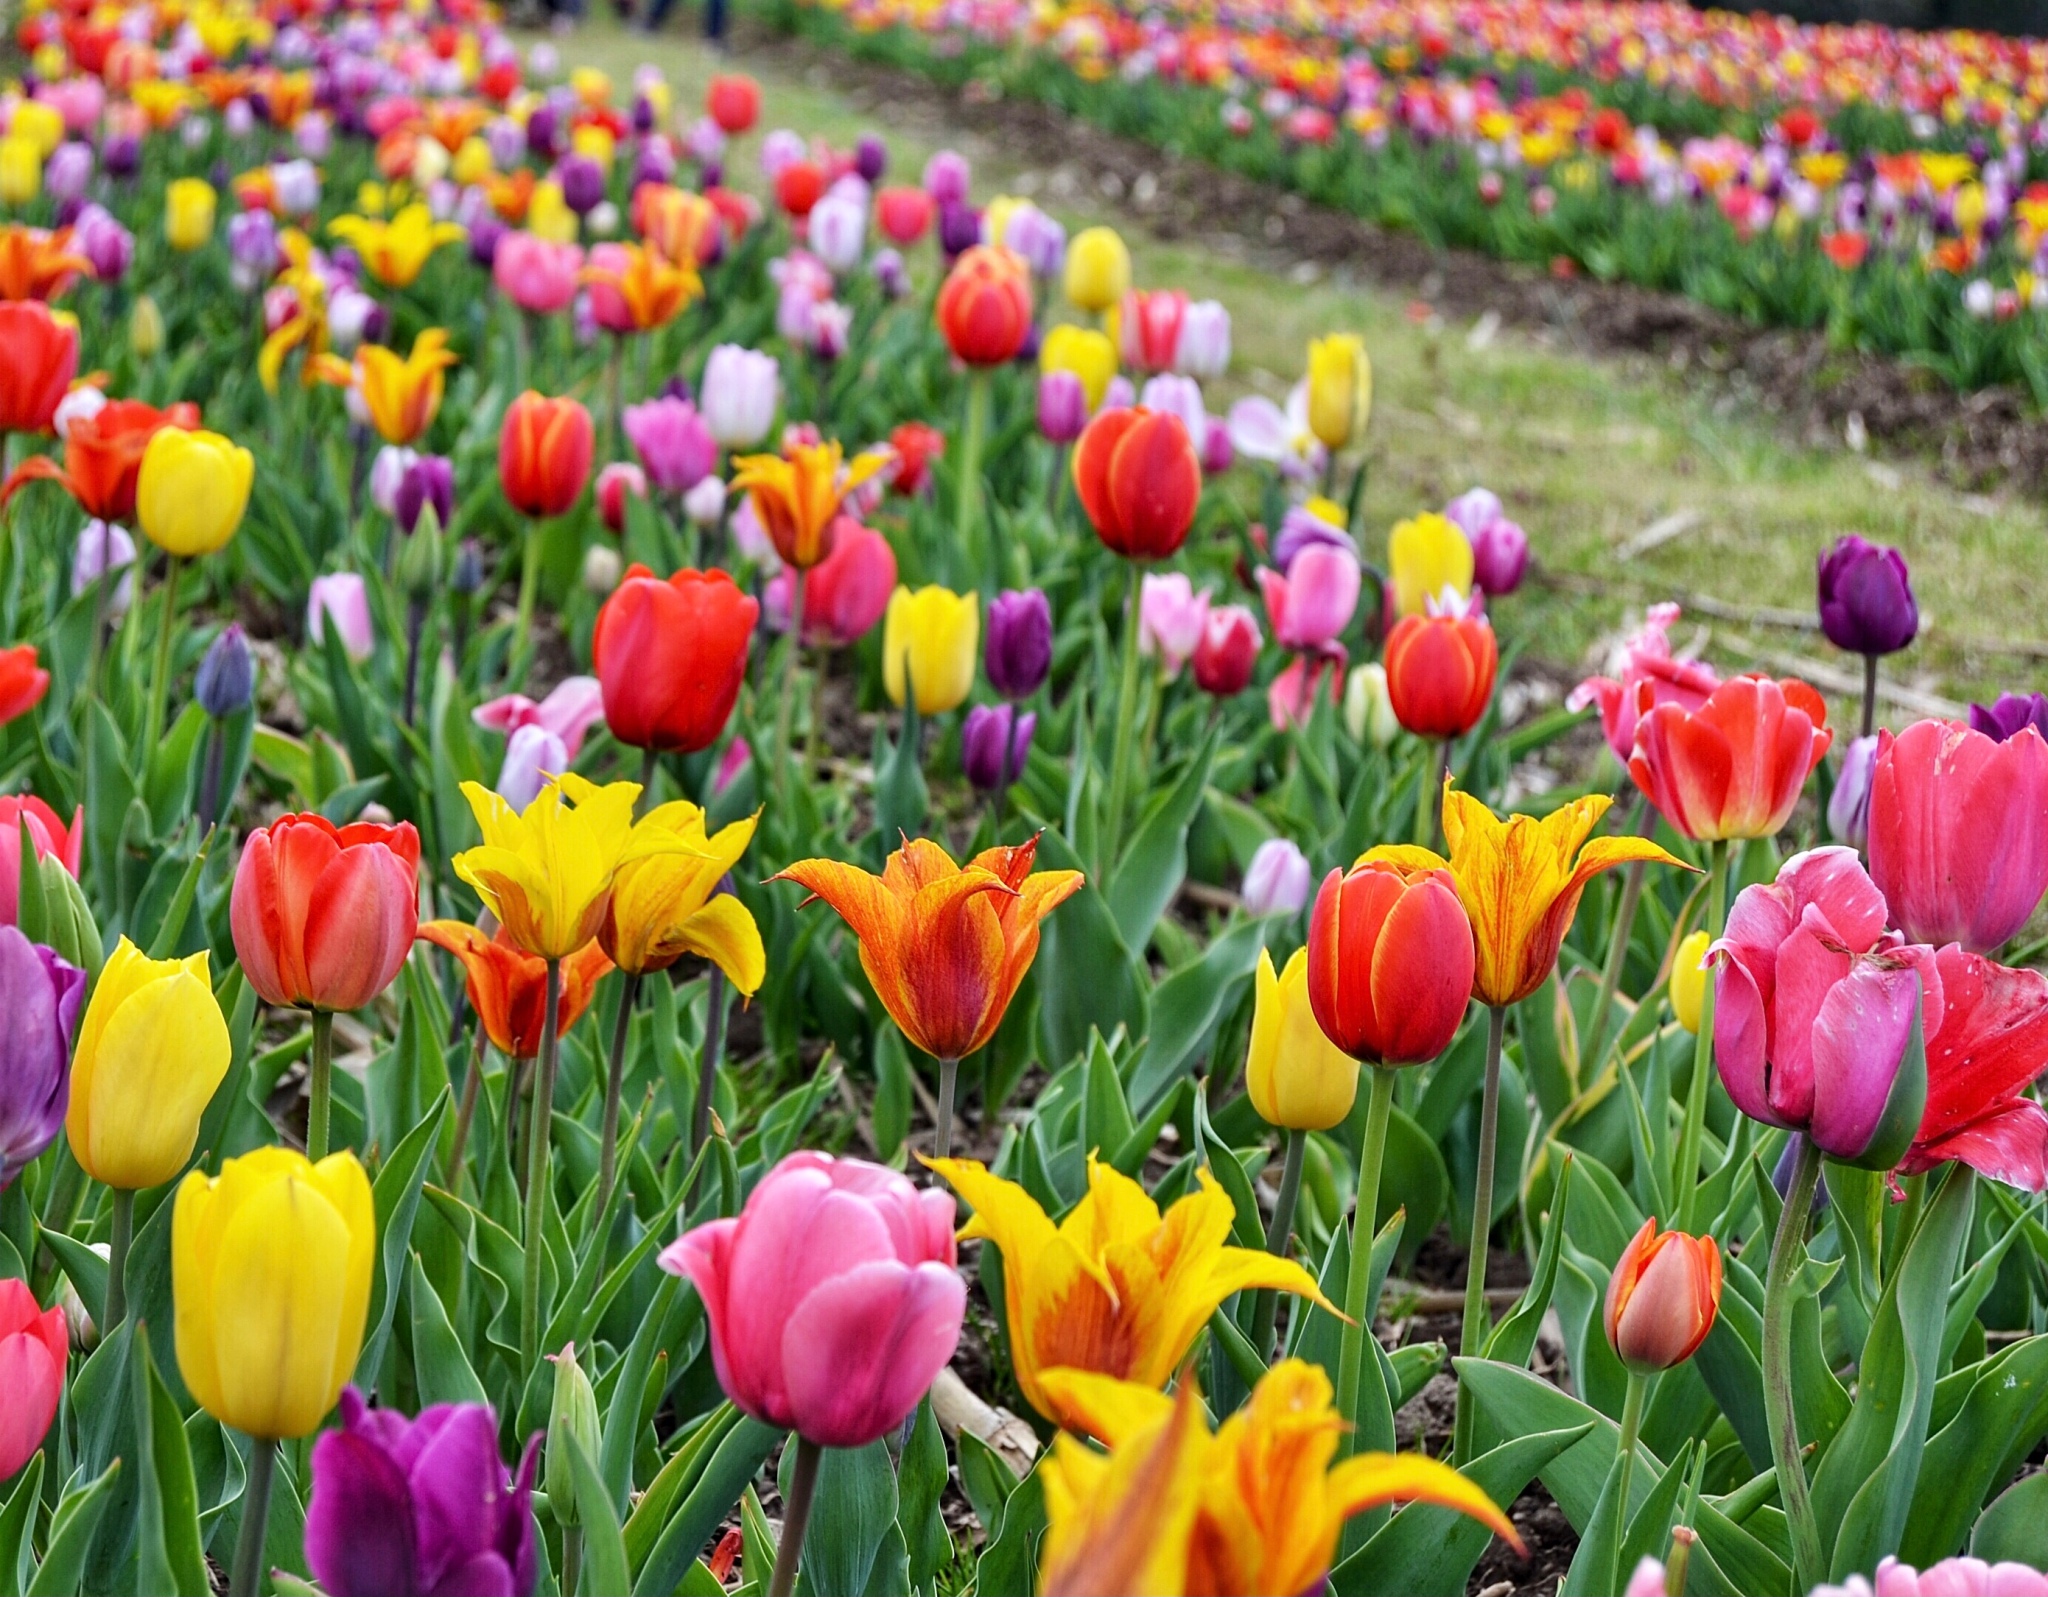 Things To Do In Virginia; Visit A Tulip Farm Let’s Just Go!